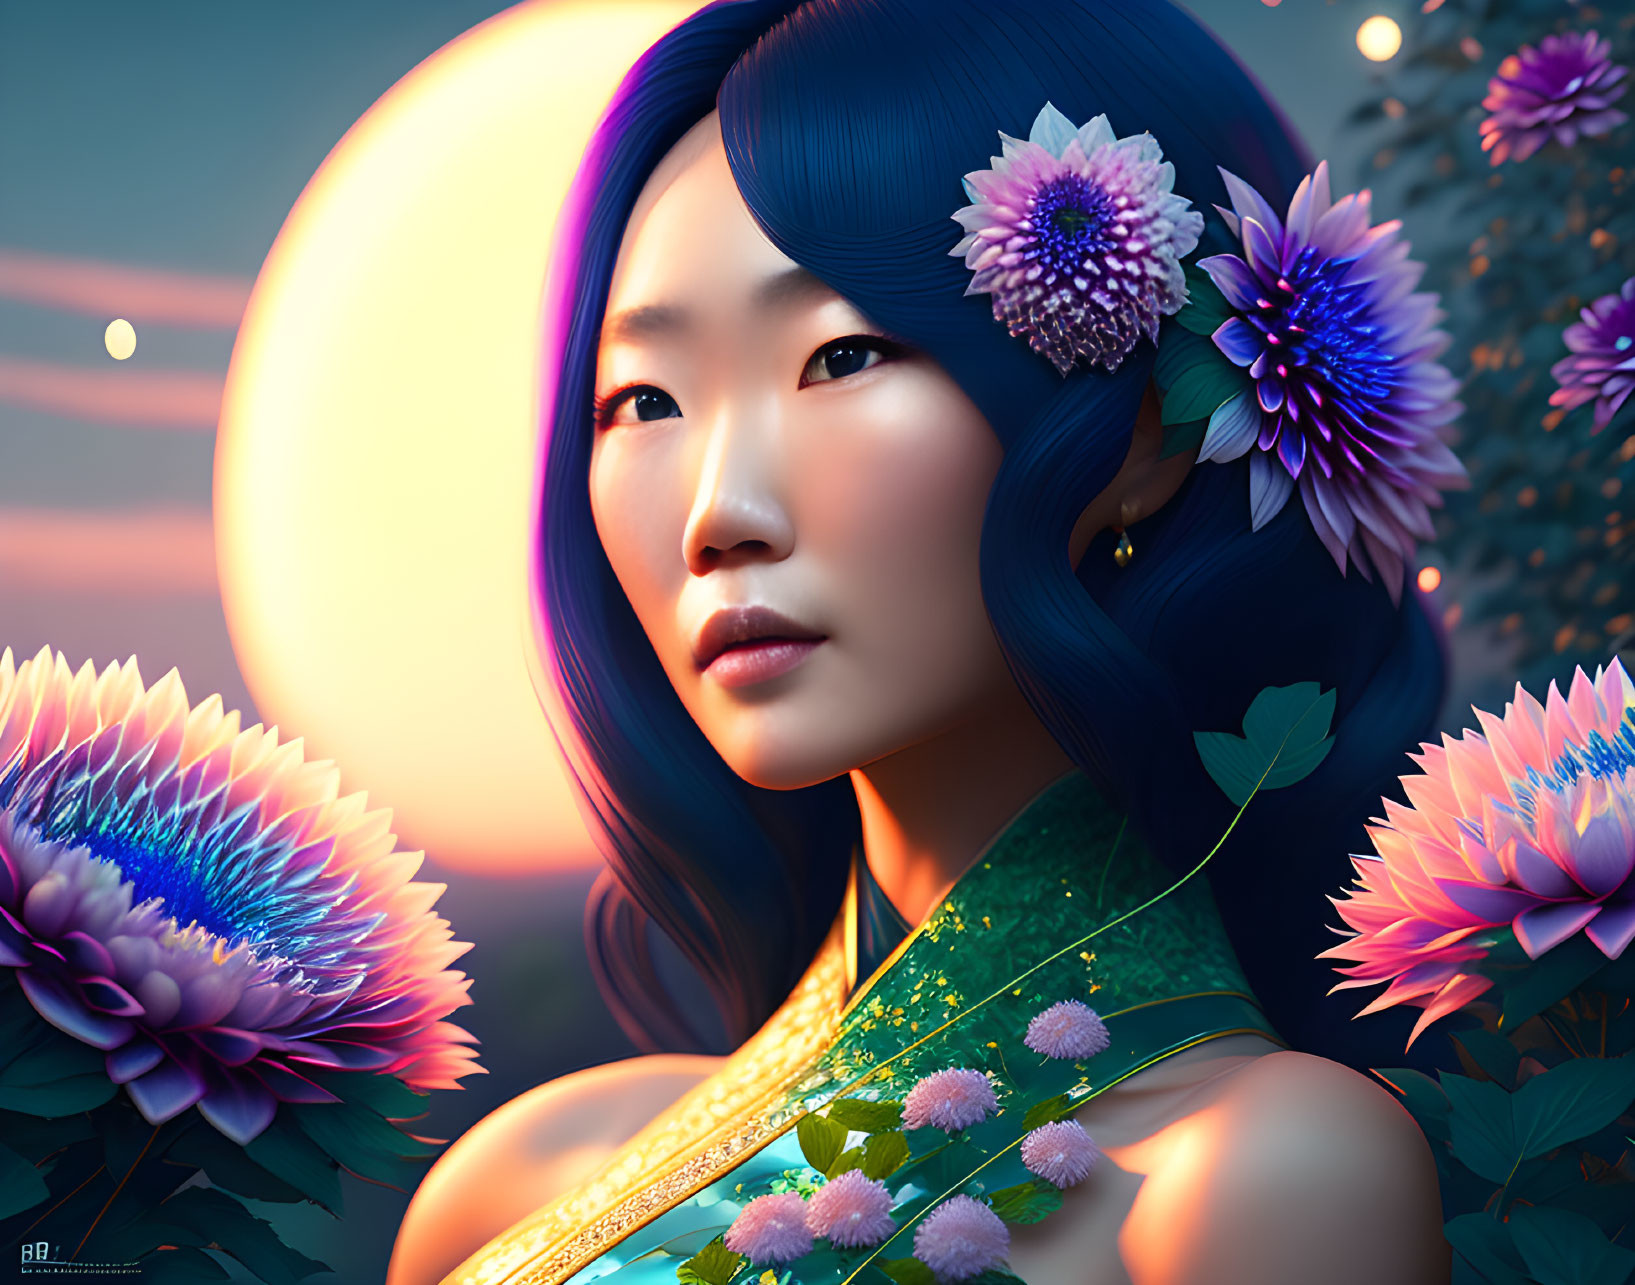 Asian woman with blue hair and purple flowers in digital portrait